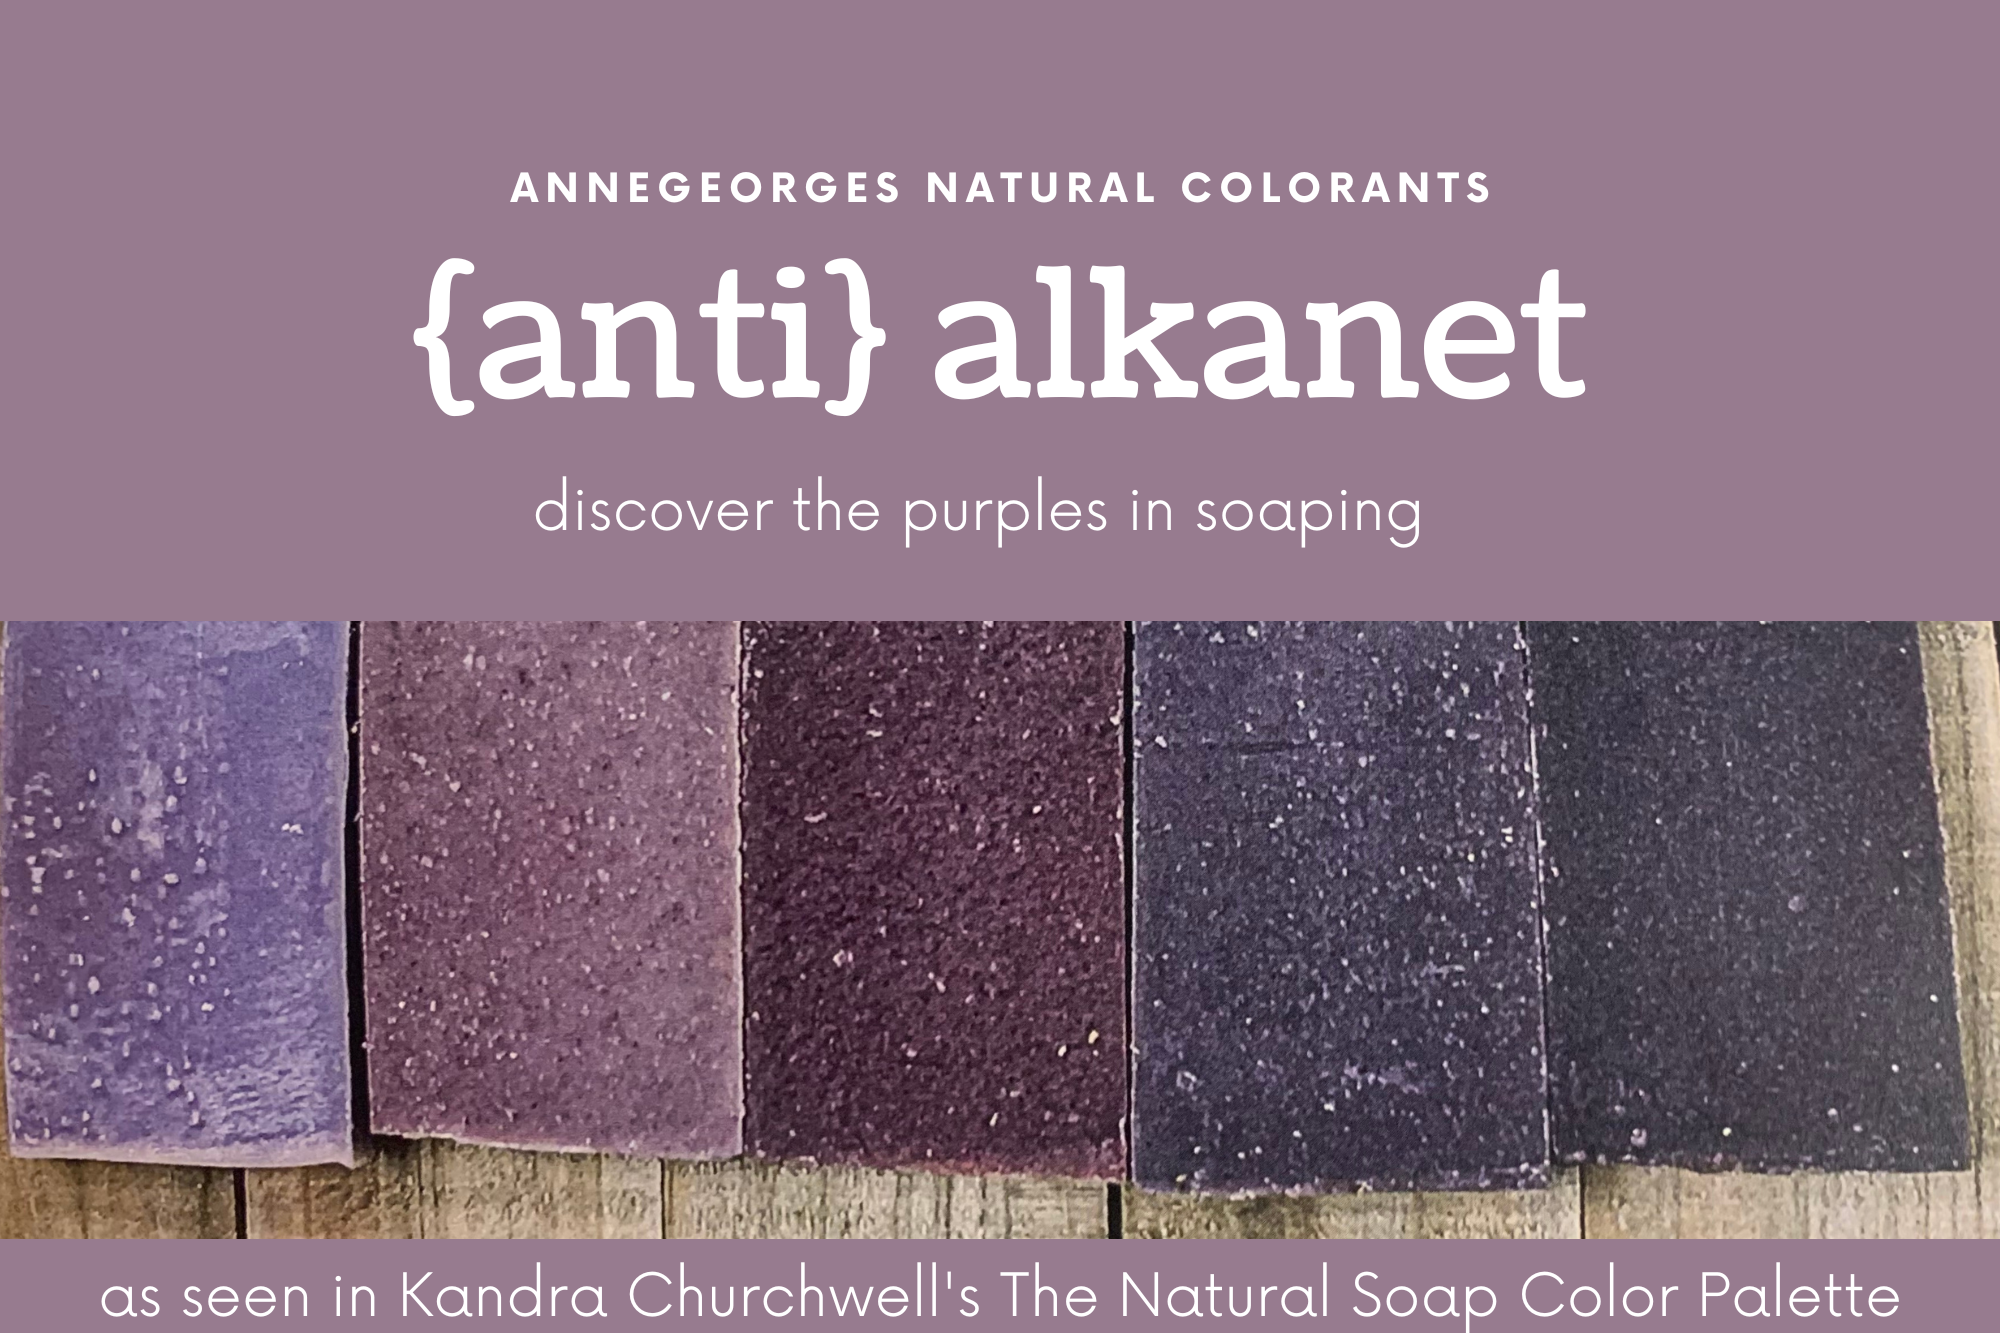 How to Make Natural Purple Soap with Alkanet Root • Lovely Greens